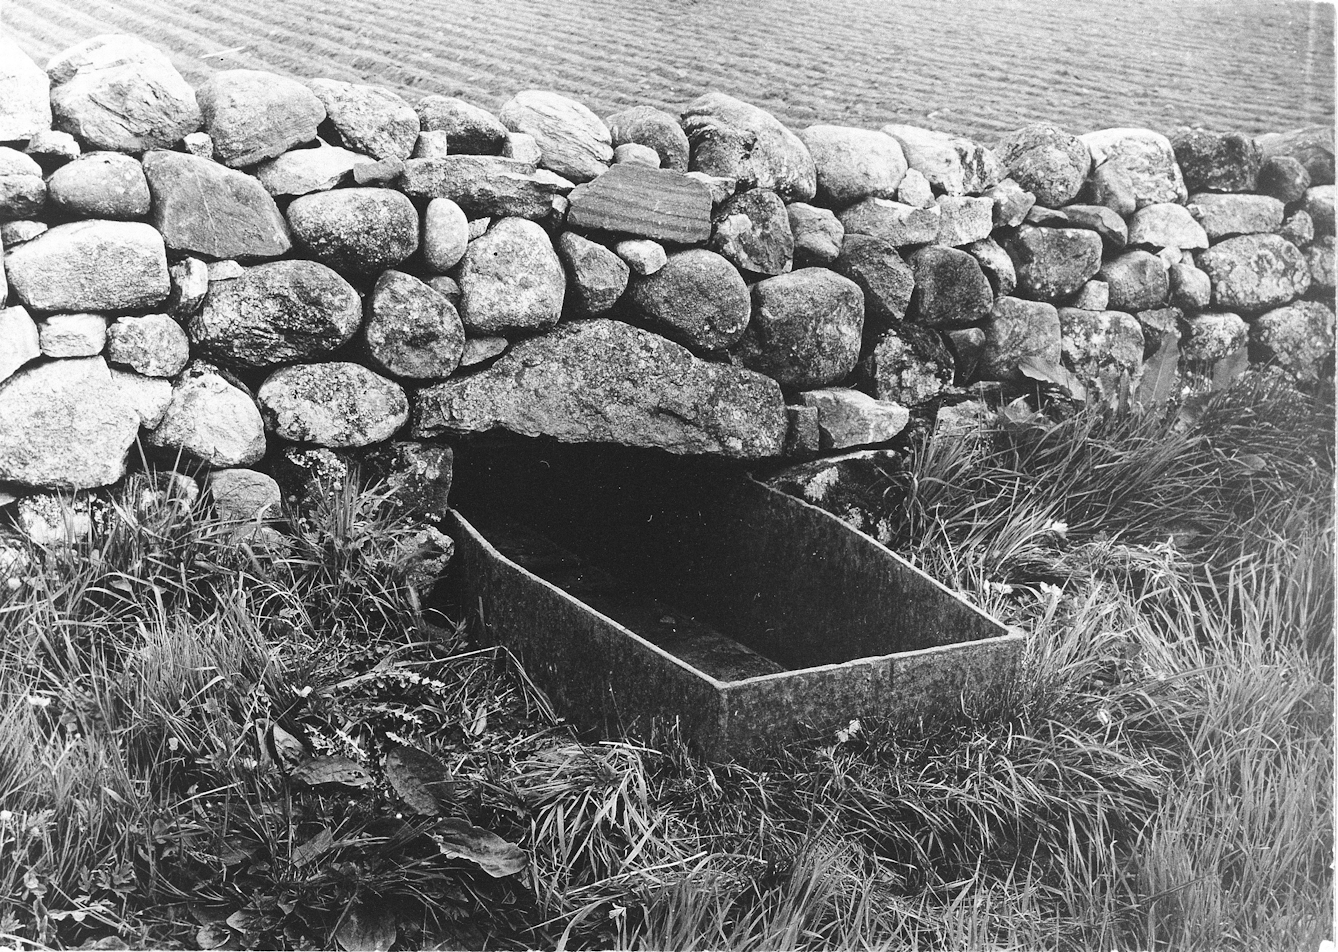 Mortsafe in graveyard at Durris, Aberdeenshire, used as a drinking trough for cattle